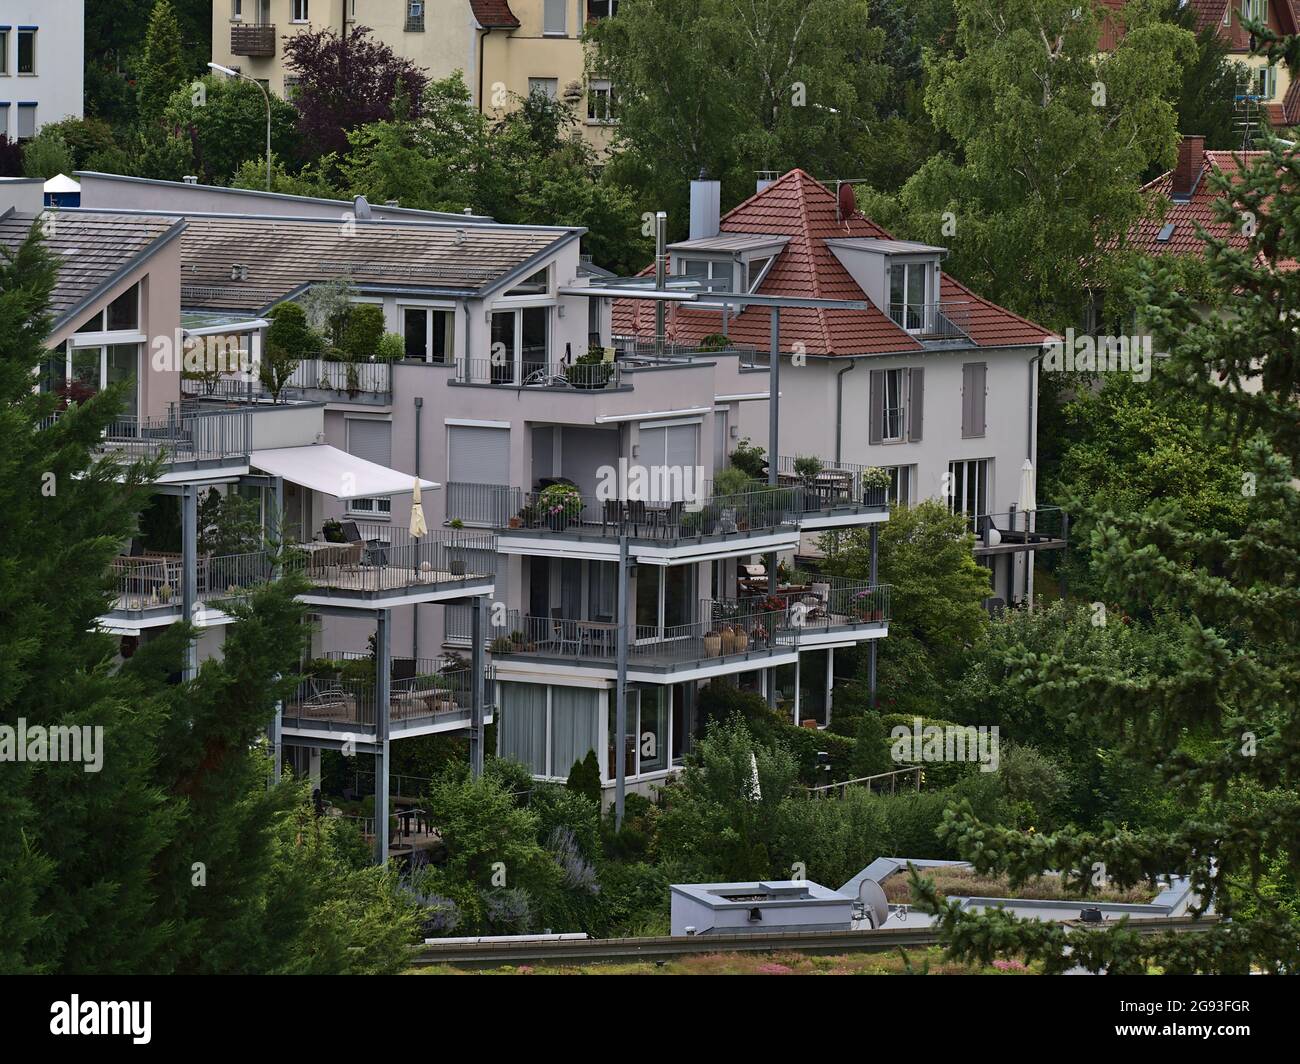 View of modern multi-family house located on a hill in town Esslingen am Neckar, Baden-Württemberg, Germany in an attractive residential district. Stock Photo